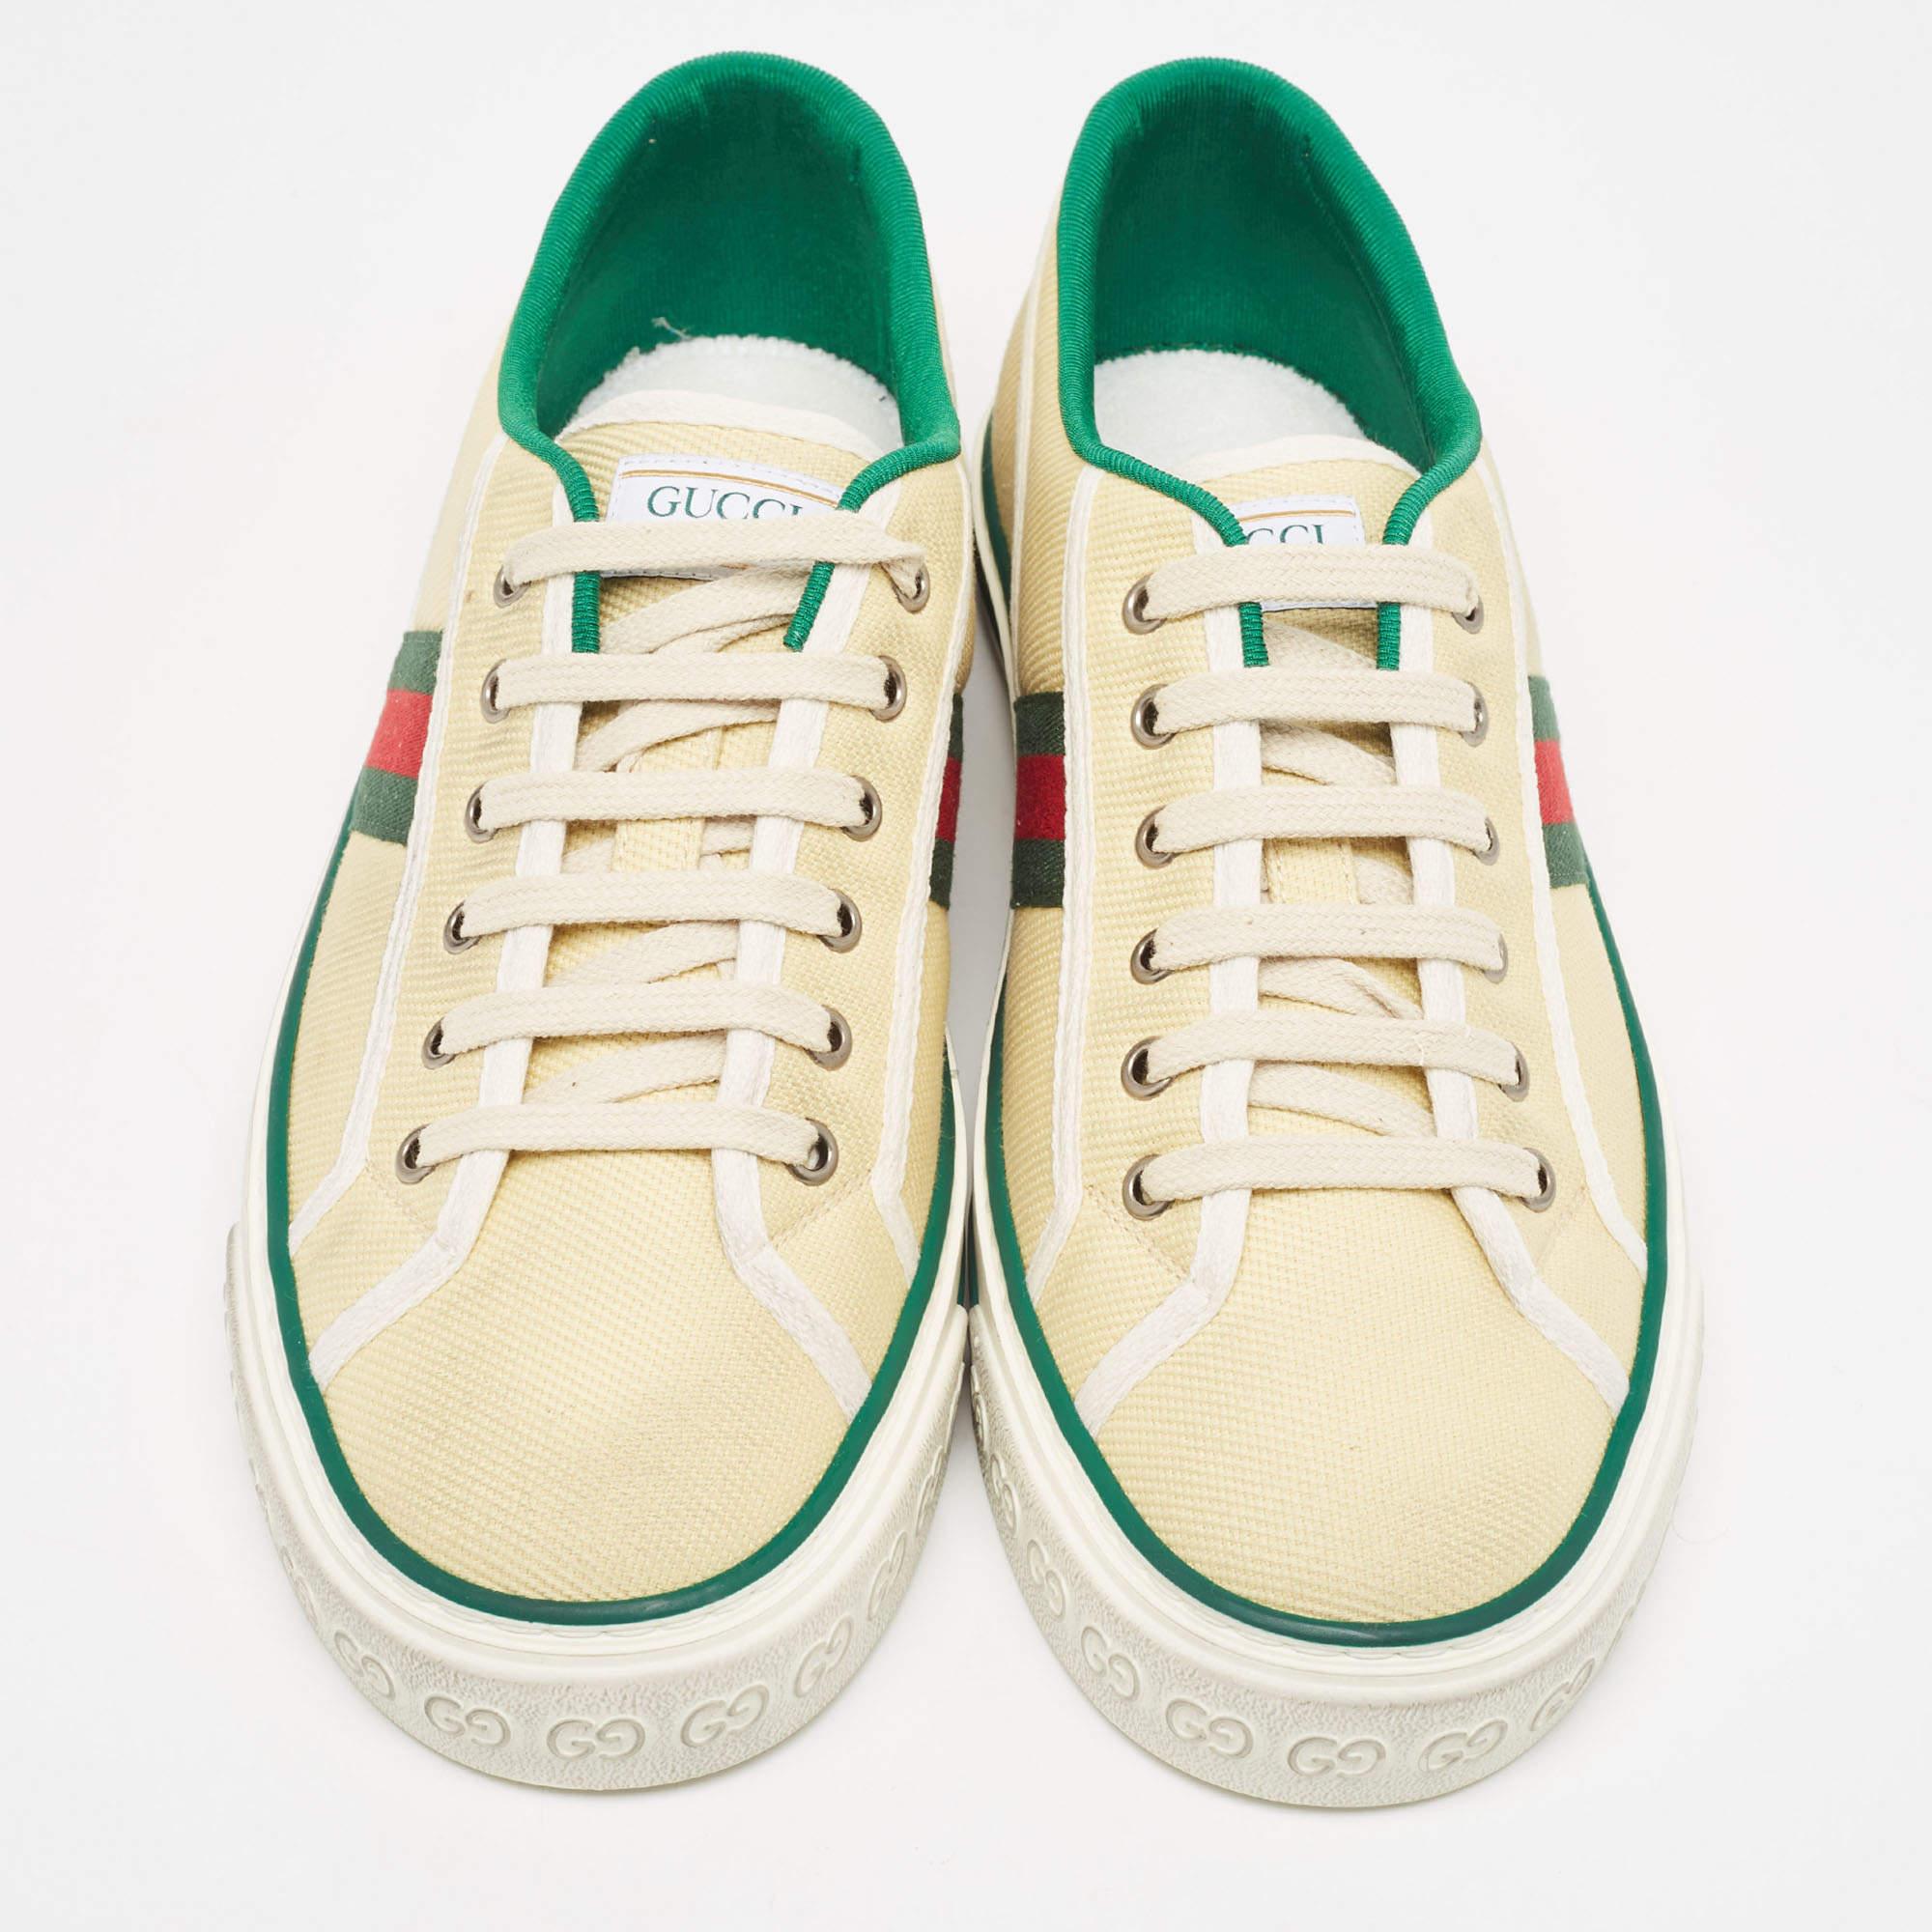 Give your outfit a luxe update with this pair of Gucci Tennis 1977 sneakers. The shoes are sewn perfectly to help you make a statement in them for a long time.

Includes: Original Box, Info Booklet, Original Dustbag

